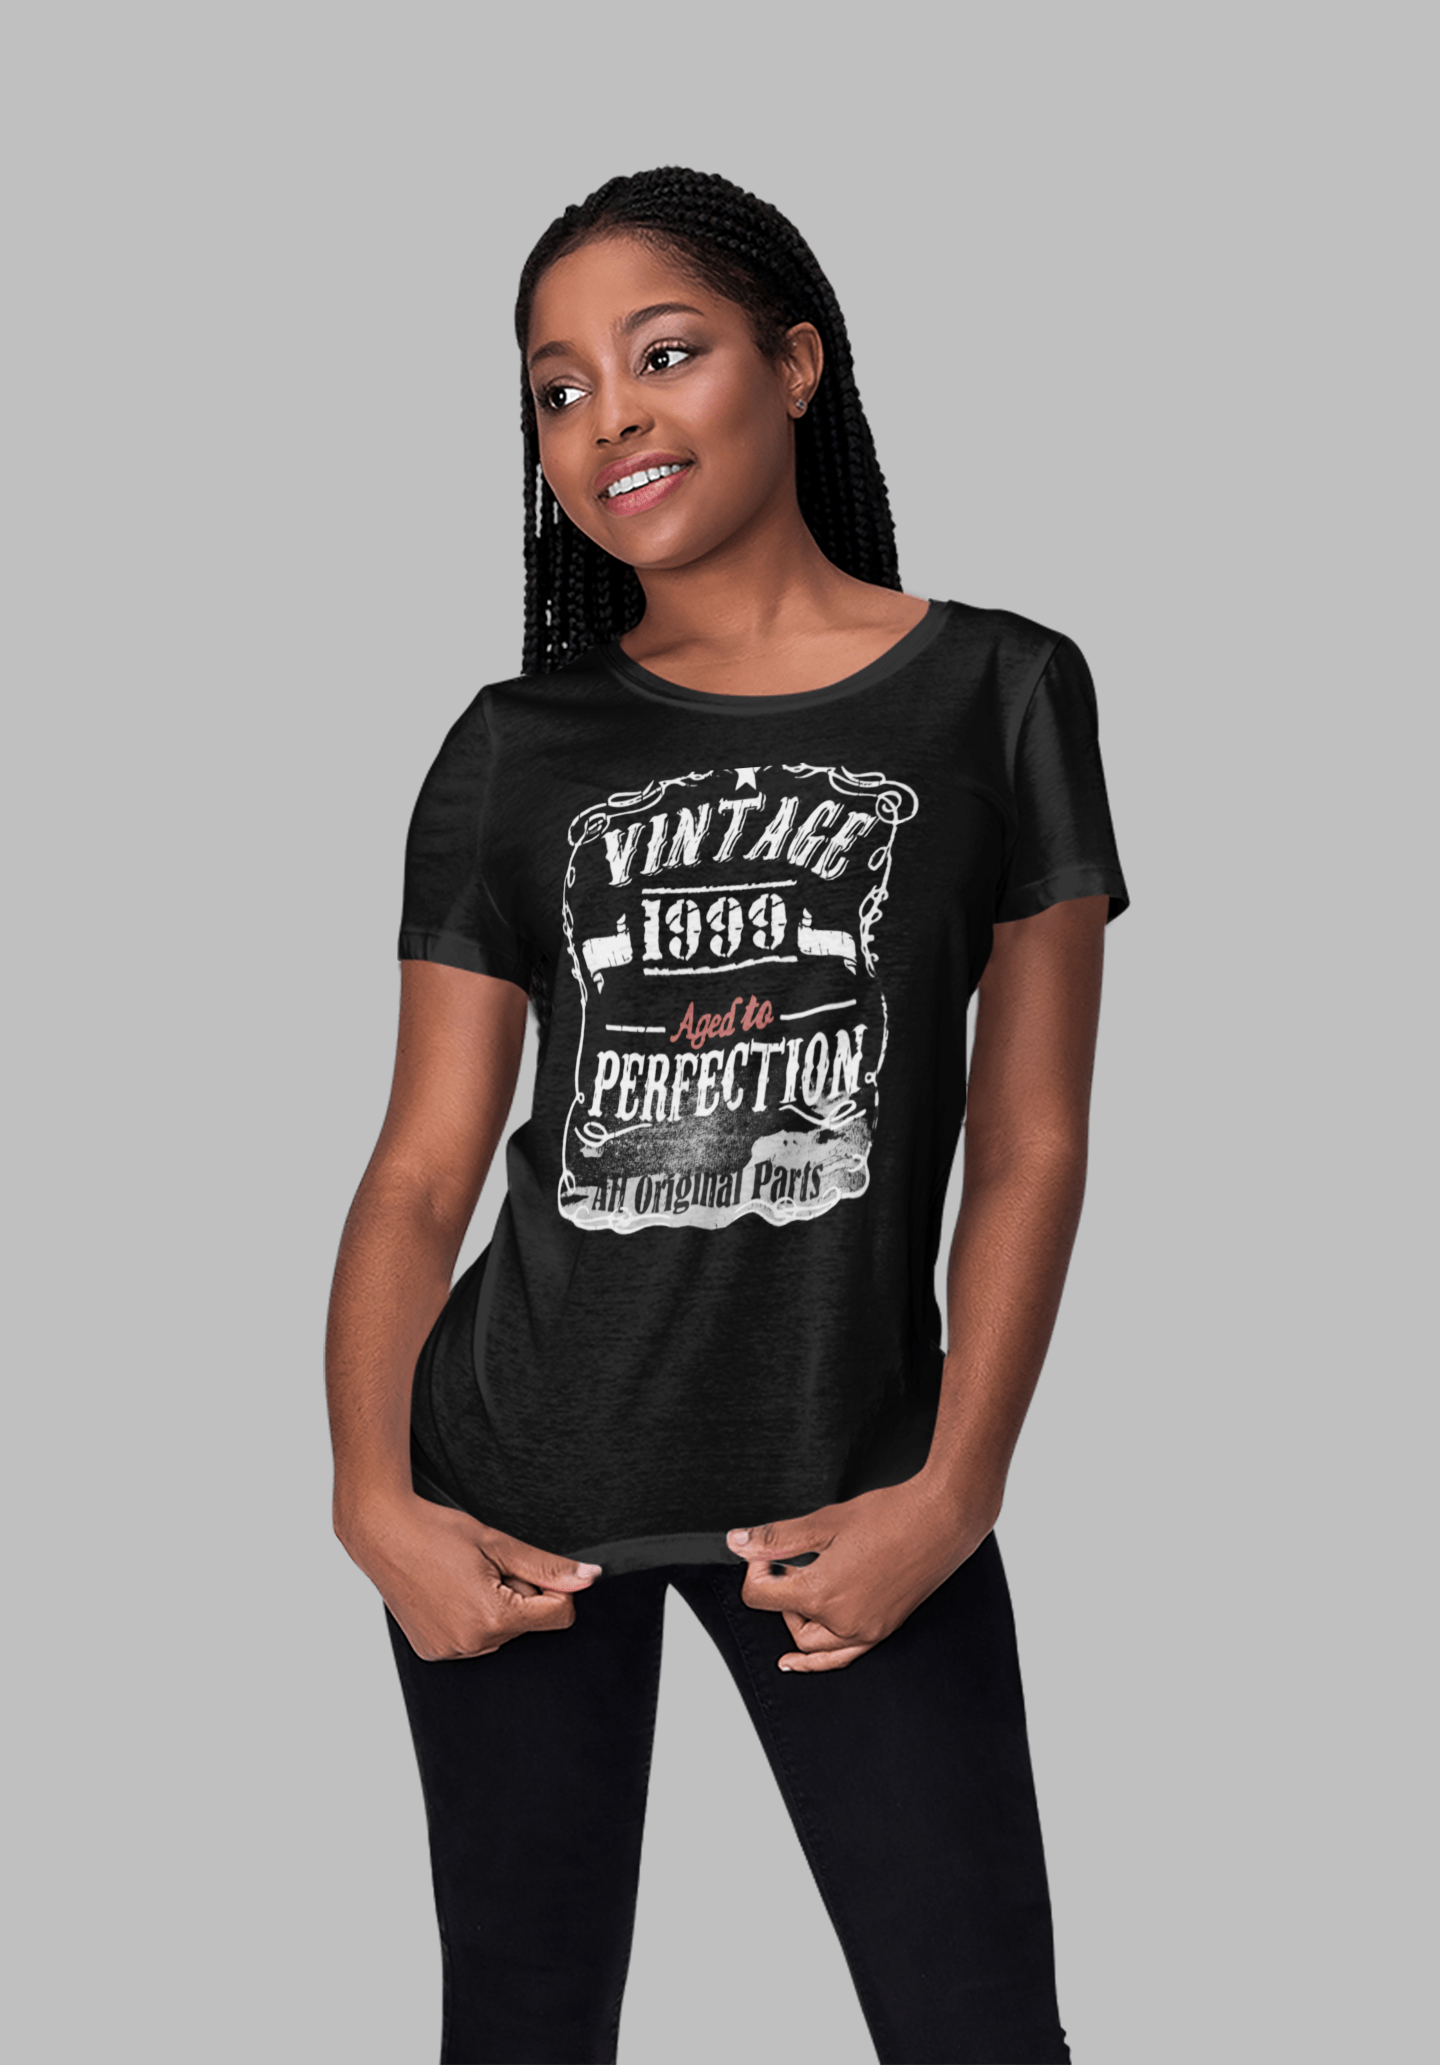 1999 Vintage Aged to Perfection Women's T-shirt Black Birthday Gift 00492